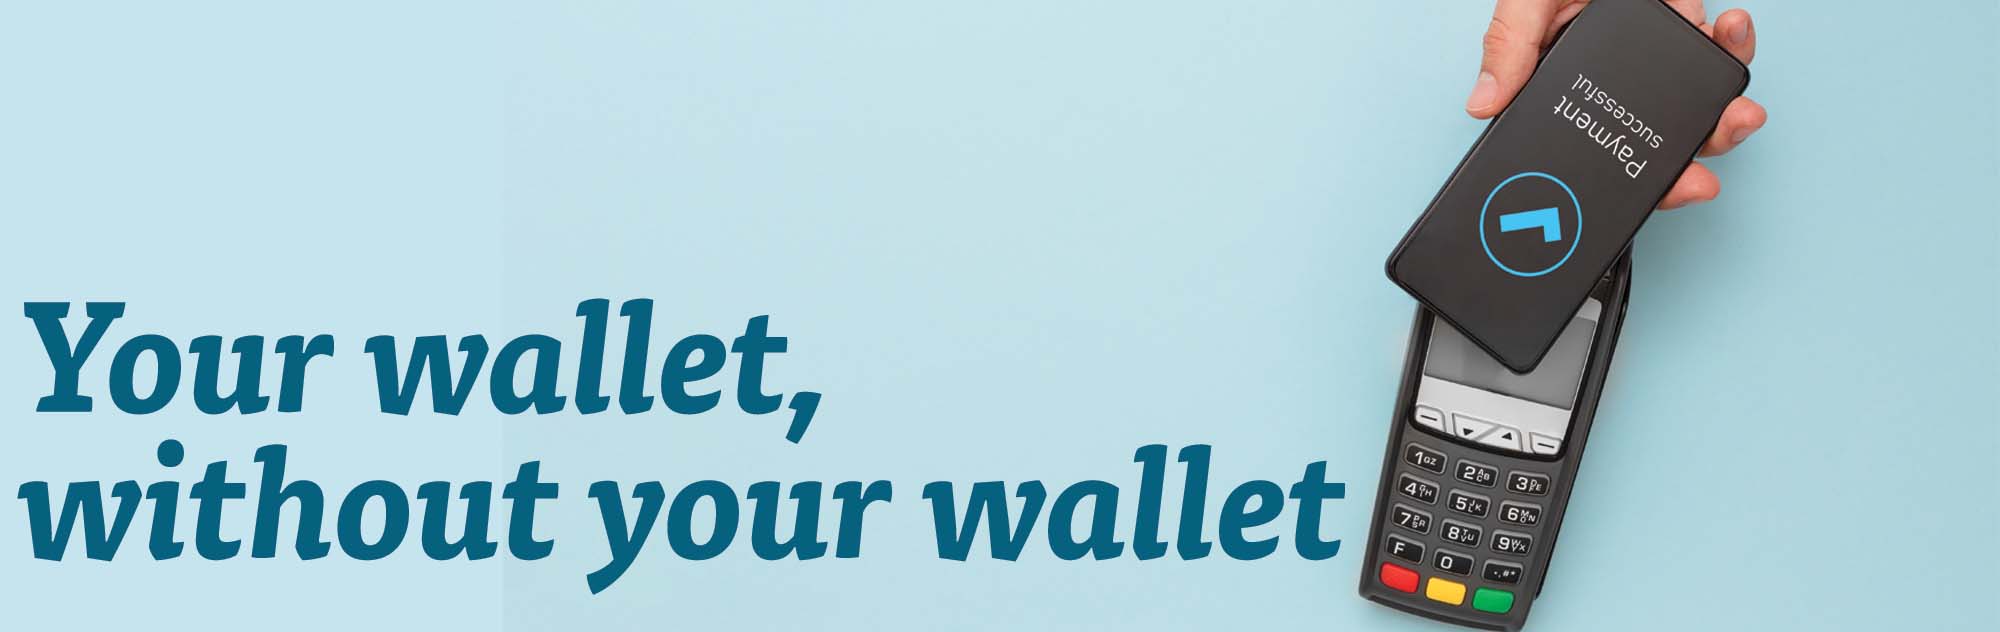 Your wallet, without your wallet